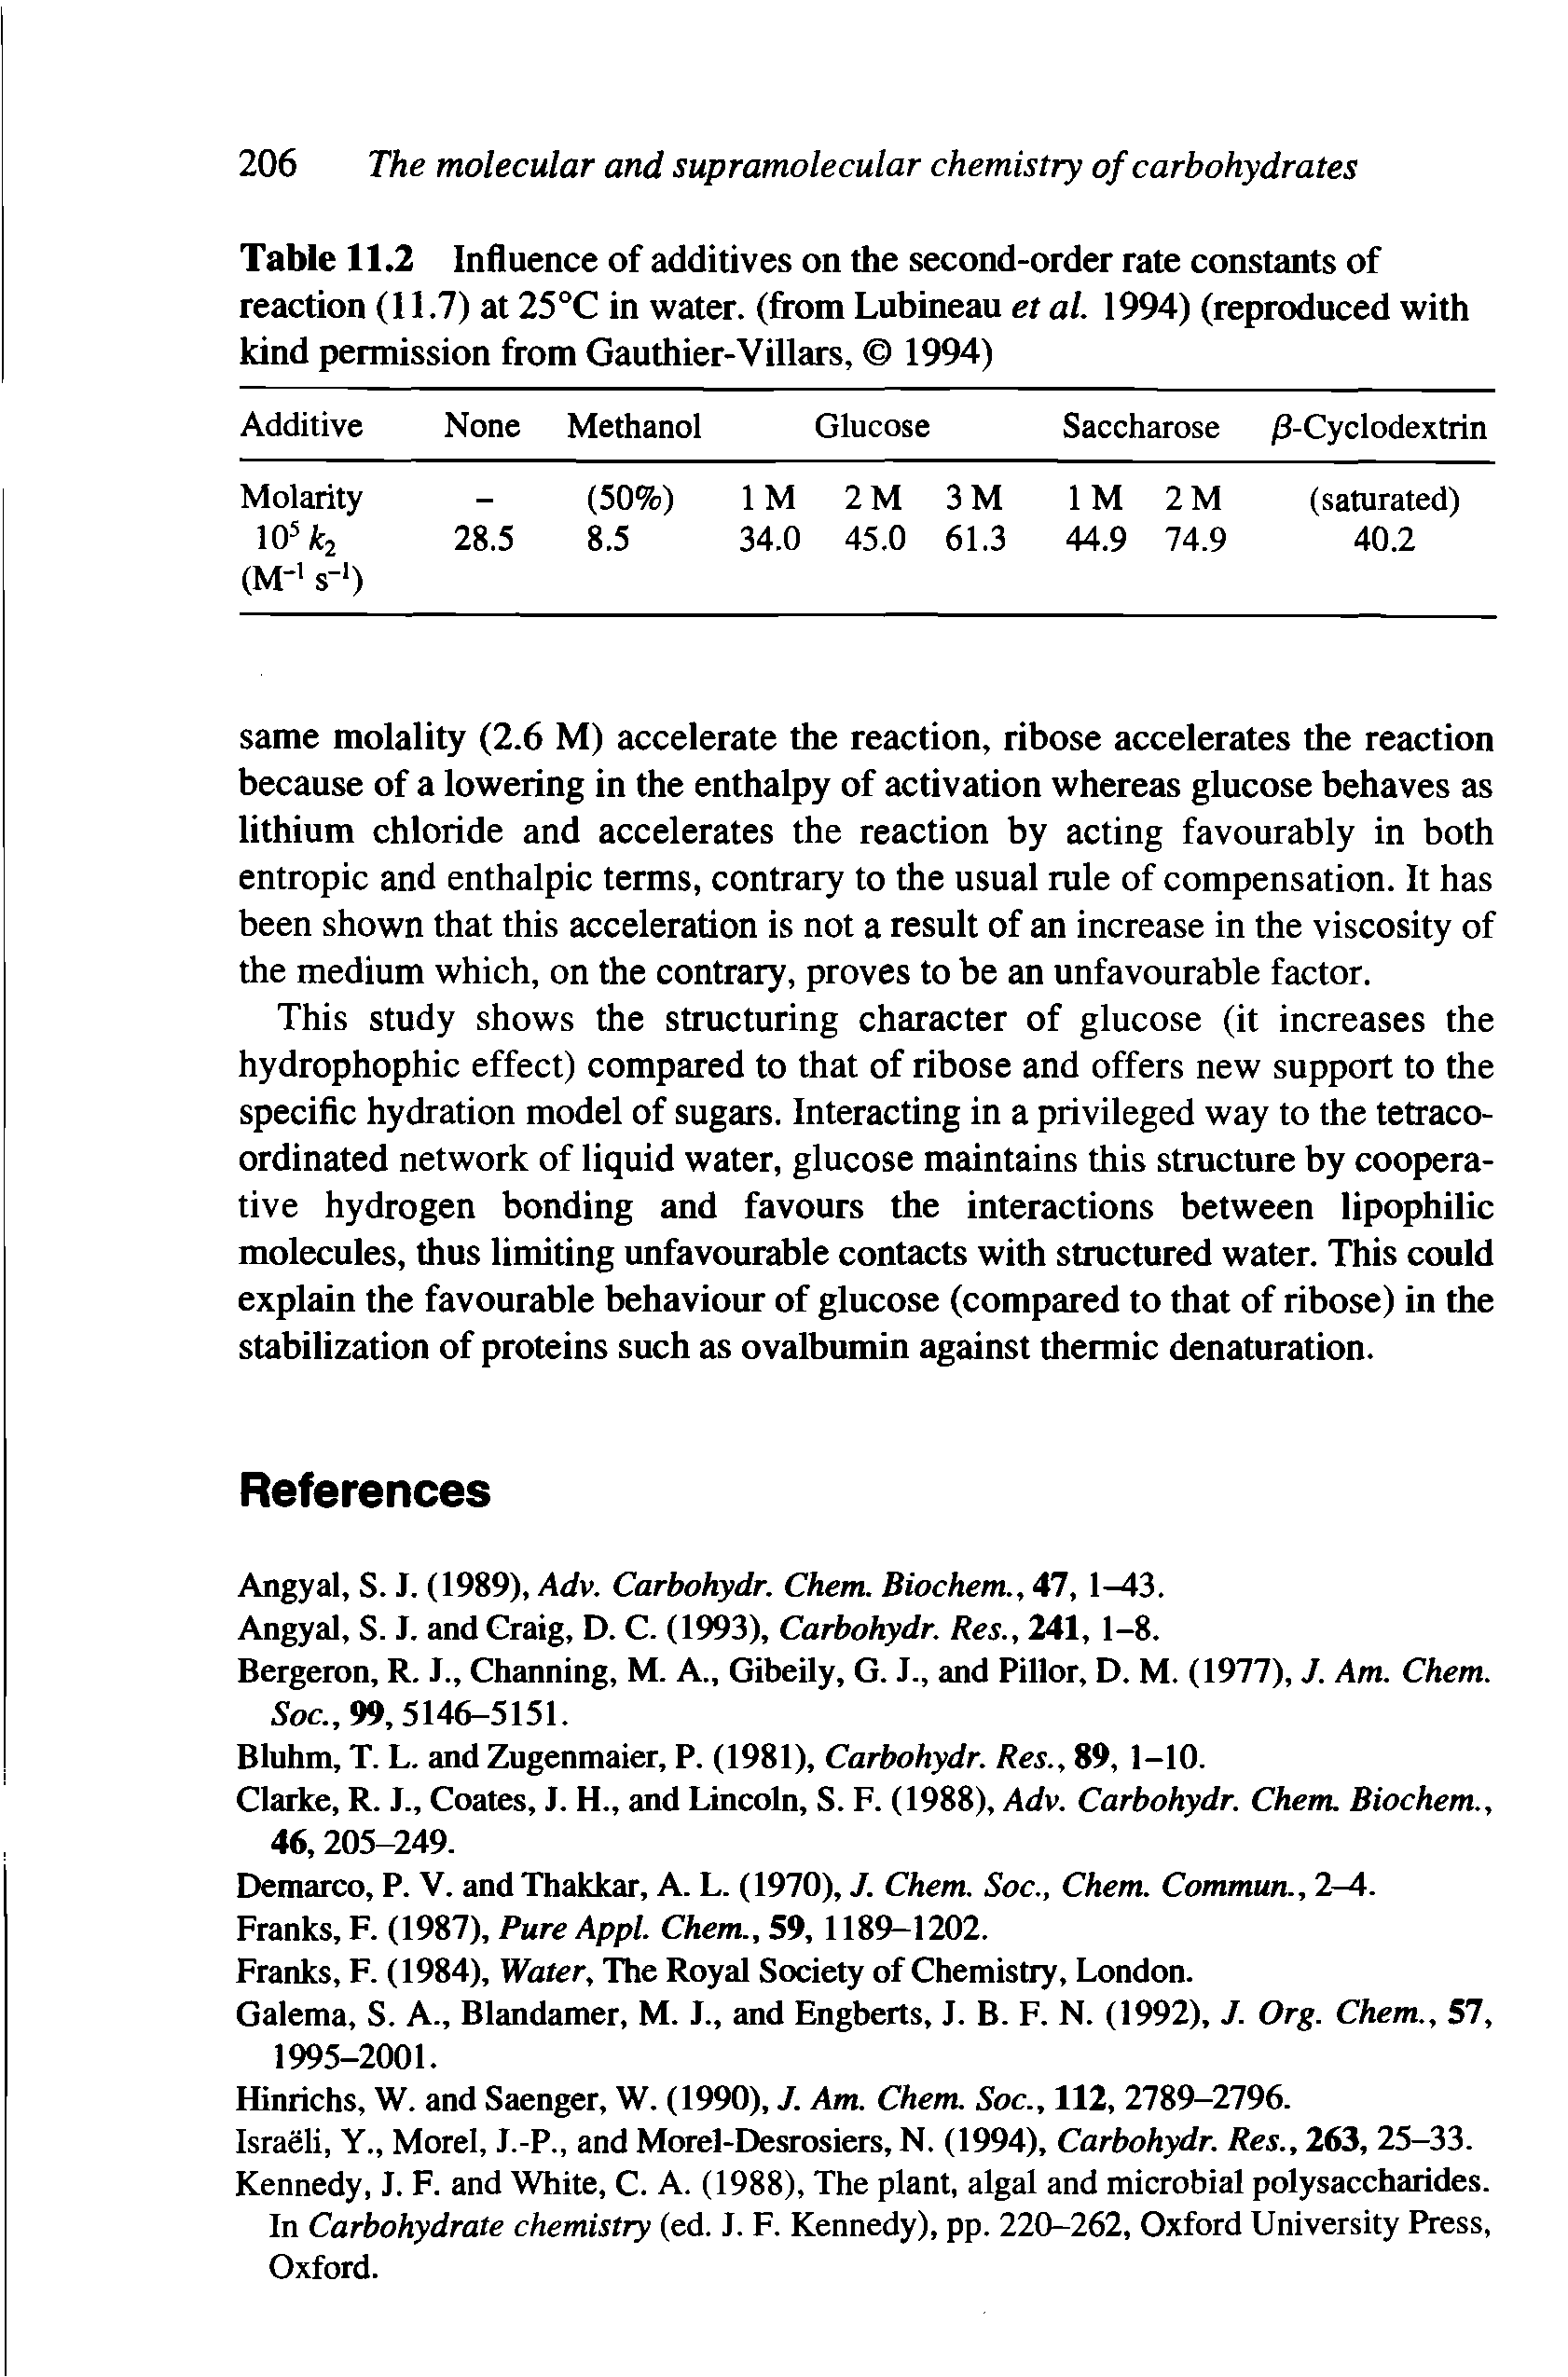 Table 11.2 Influence of additives on the second-order rate constants of reaction (11.7) at 25°C in water, (from Lubineau et al. 1994) (reproduced with kind permission from Gauthier-Villars, 1994)...